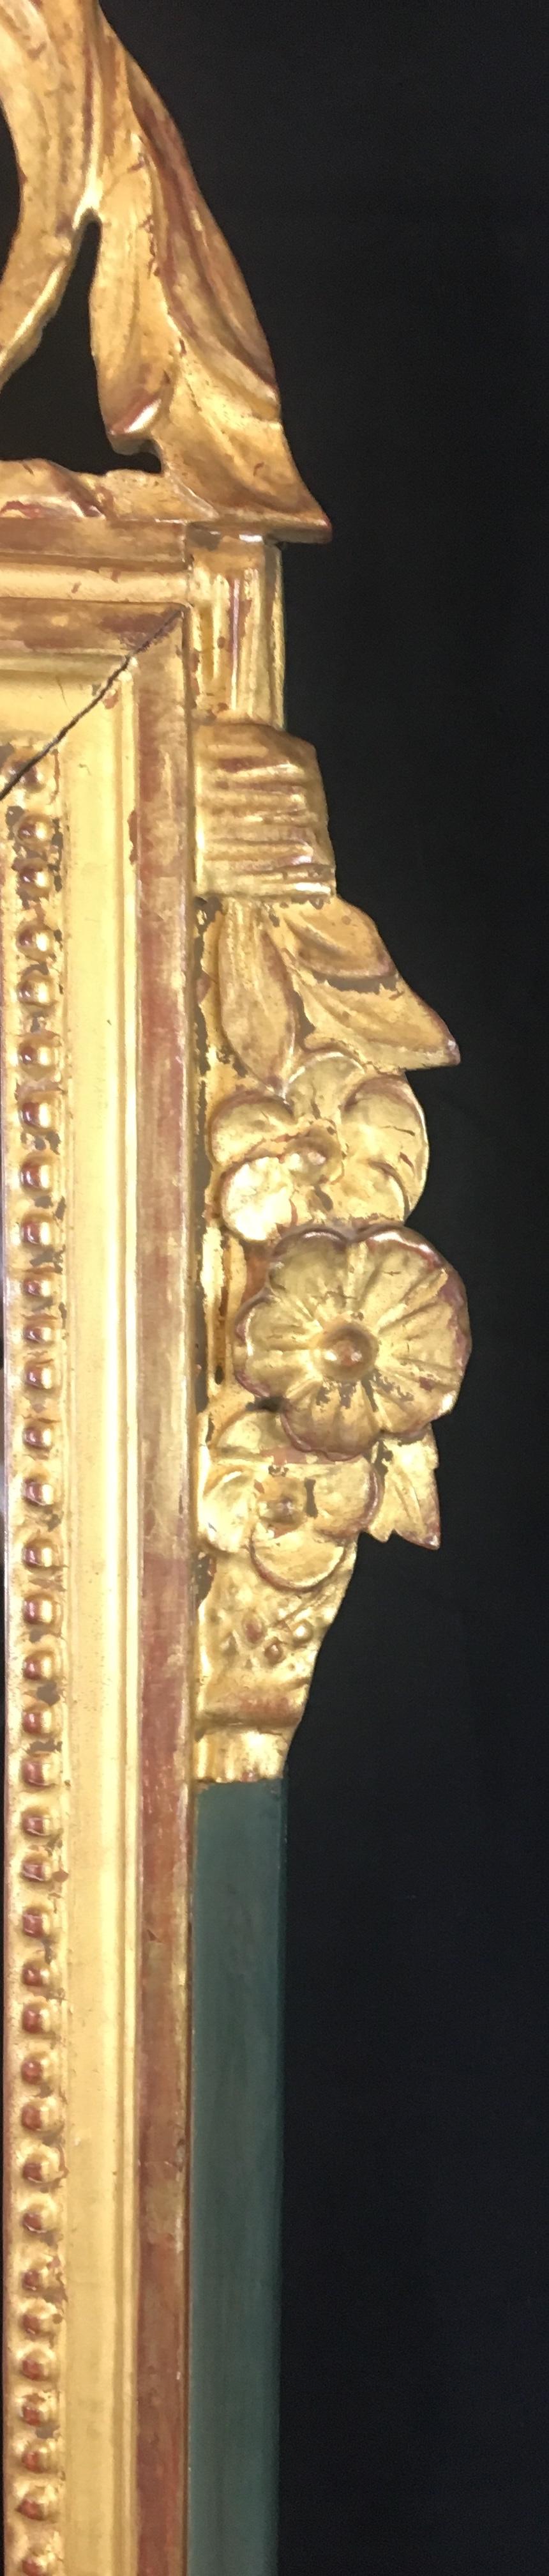 Hand-Carved French Louis XVI Style Gilt Wall Mirror For Sale